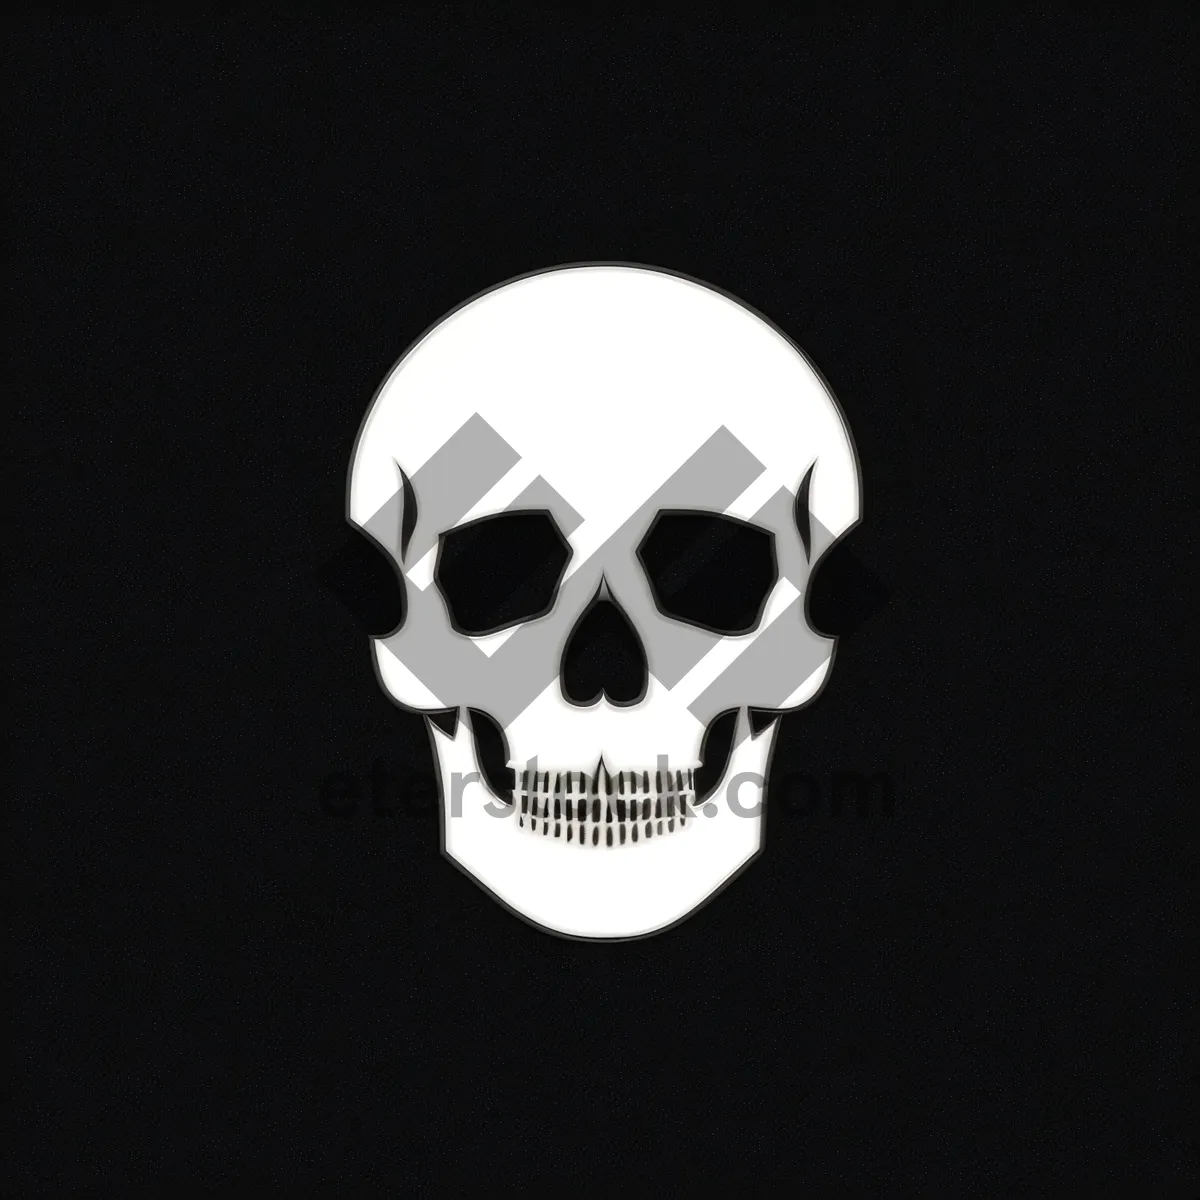 Picture of Pirate Skull - Scary Symbol of Death and Horror